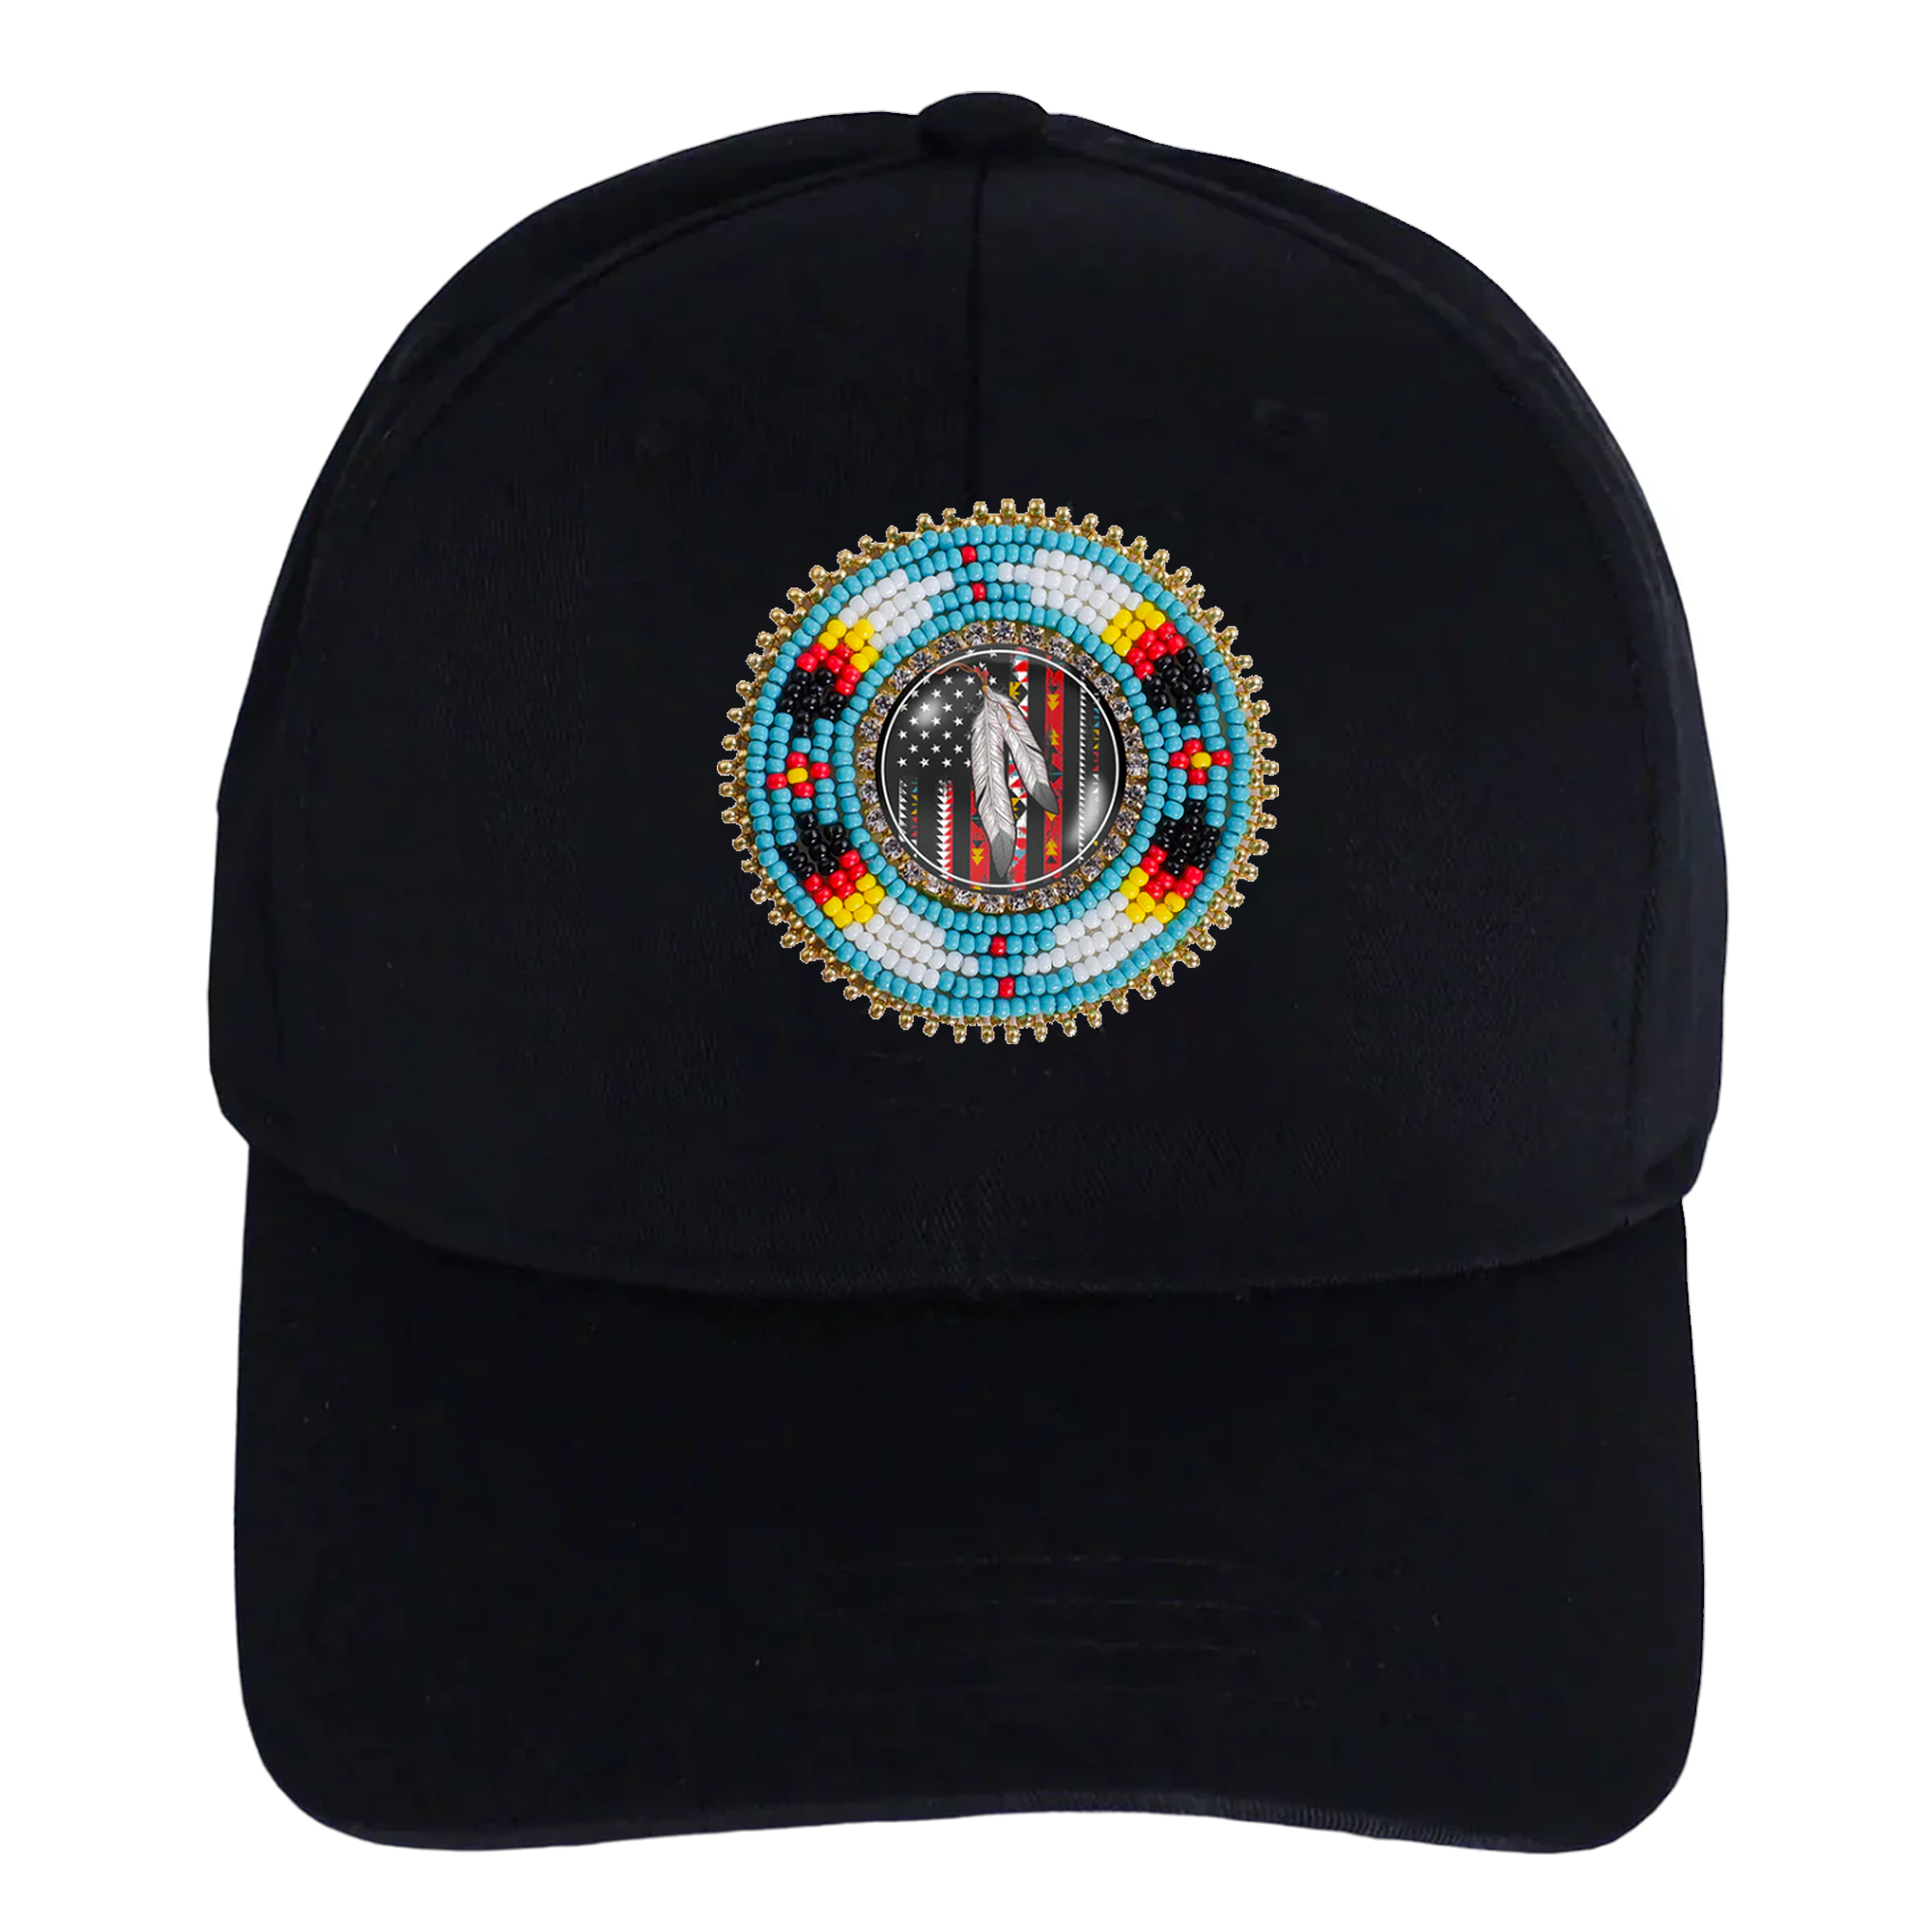 SALE 50% OFF - Feather Baseball Cap With Beaded Patch A Cotton Unisex Native American Style